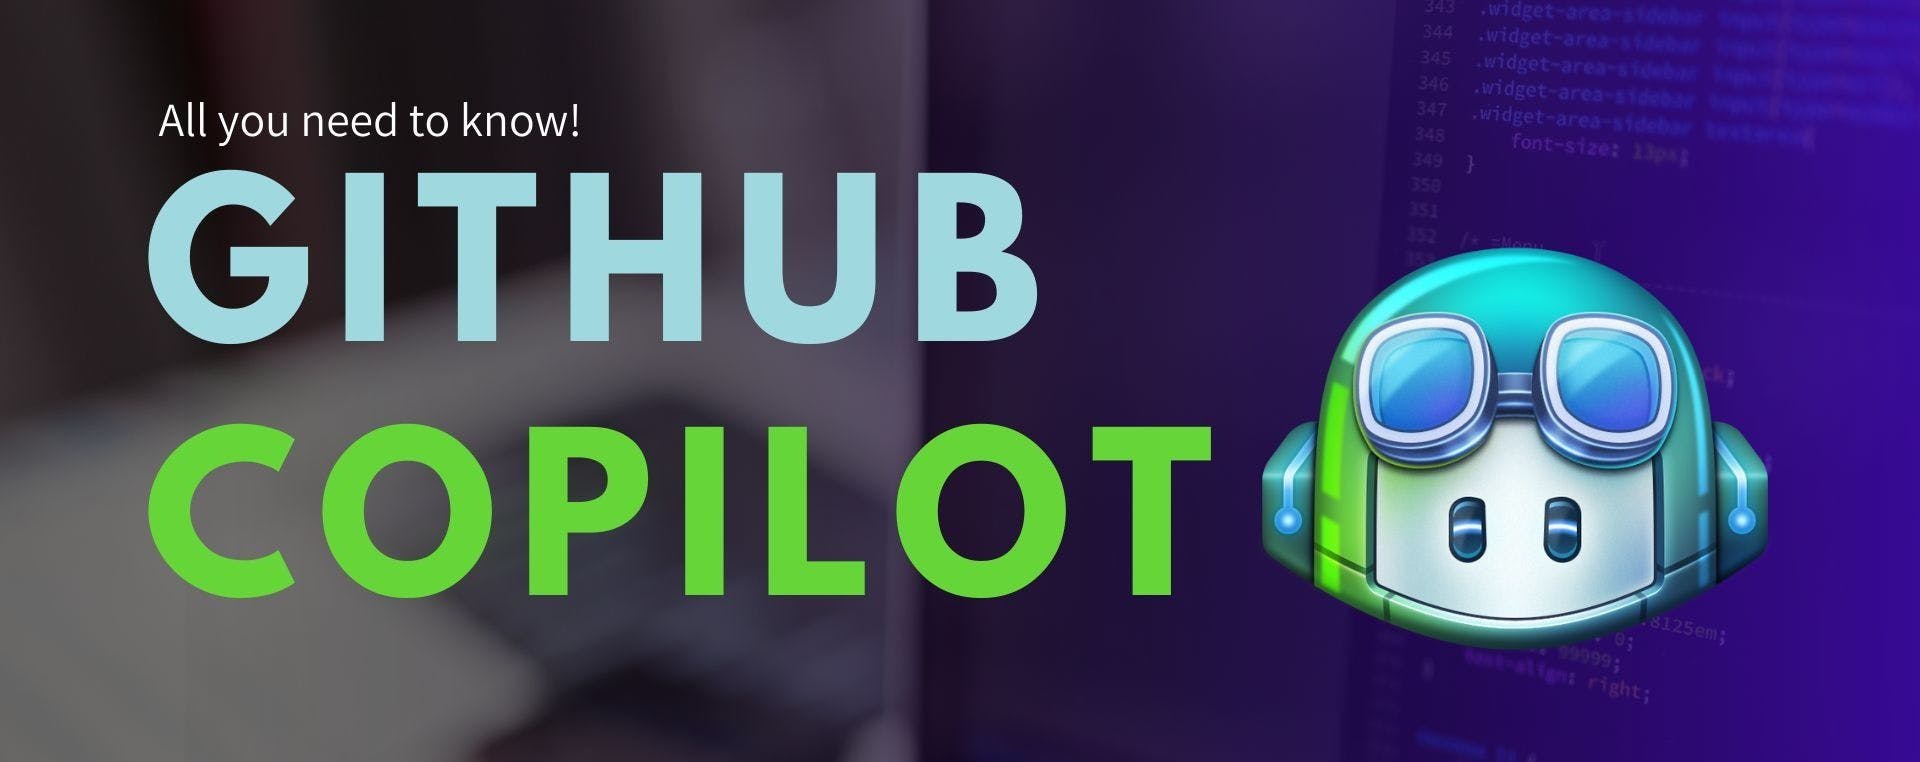 featured image - Everything You Need to Know About GitHub Copilot